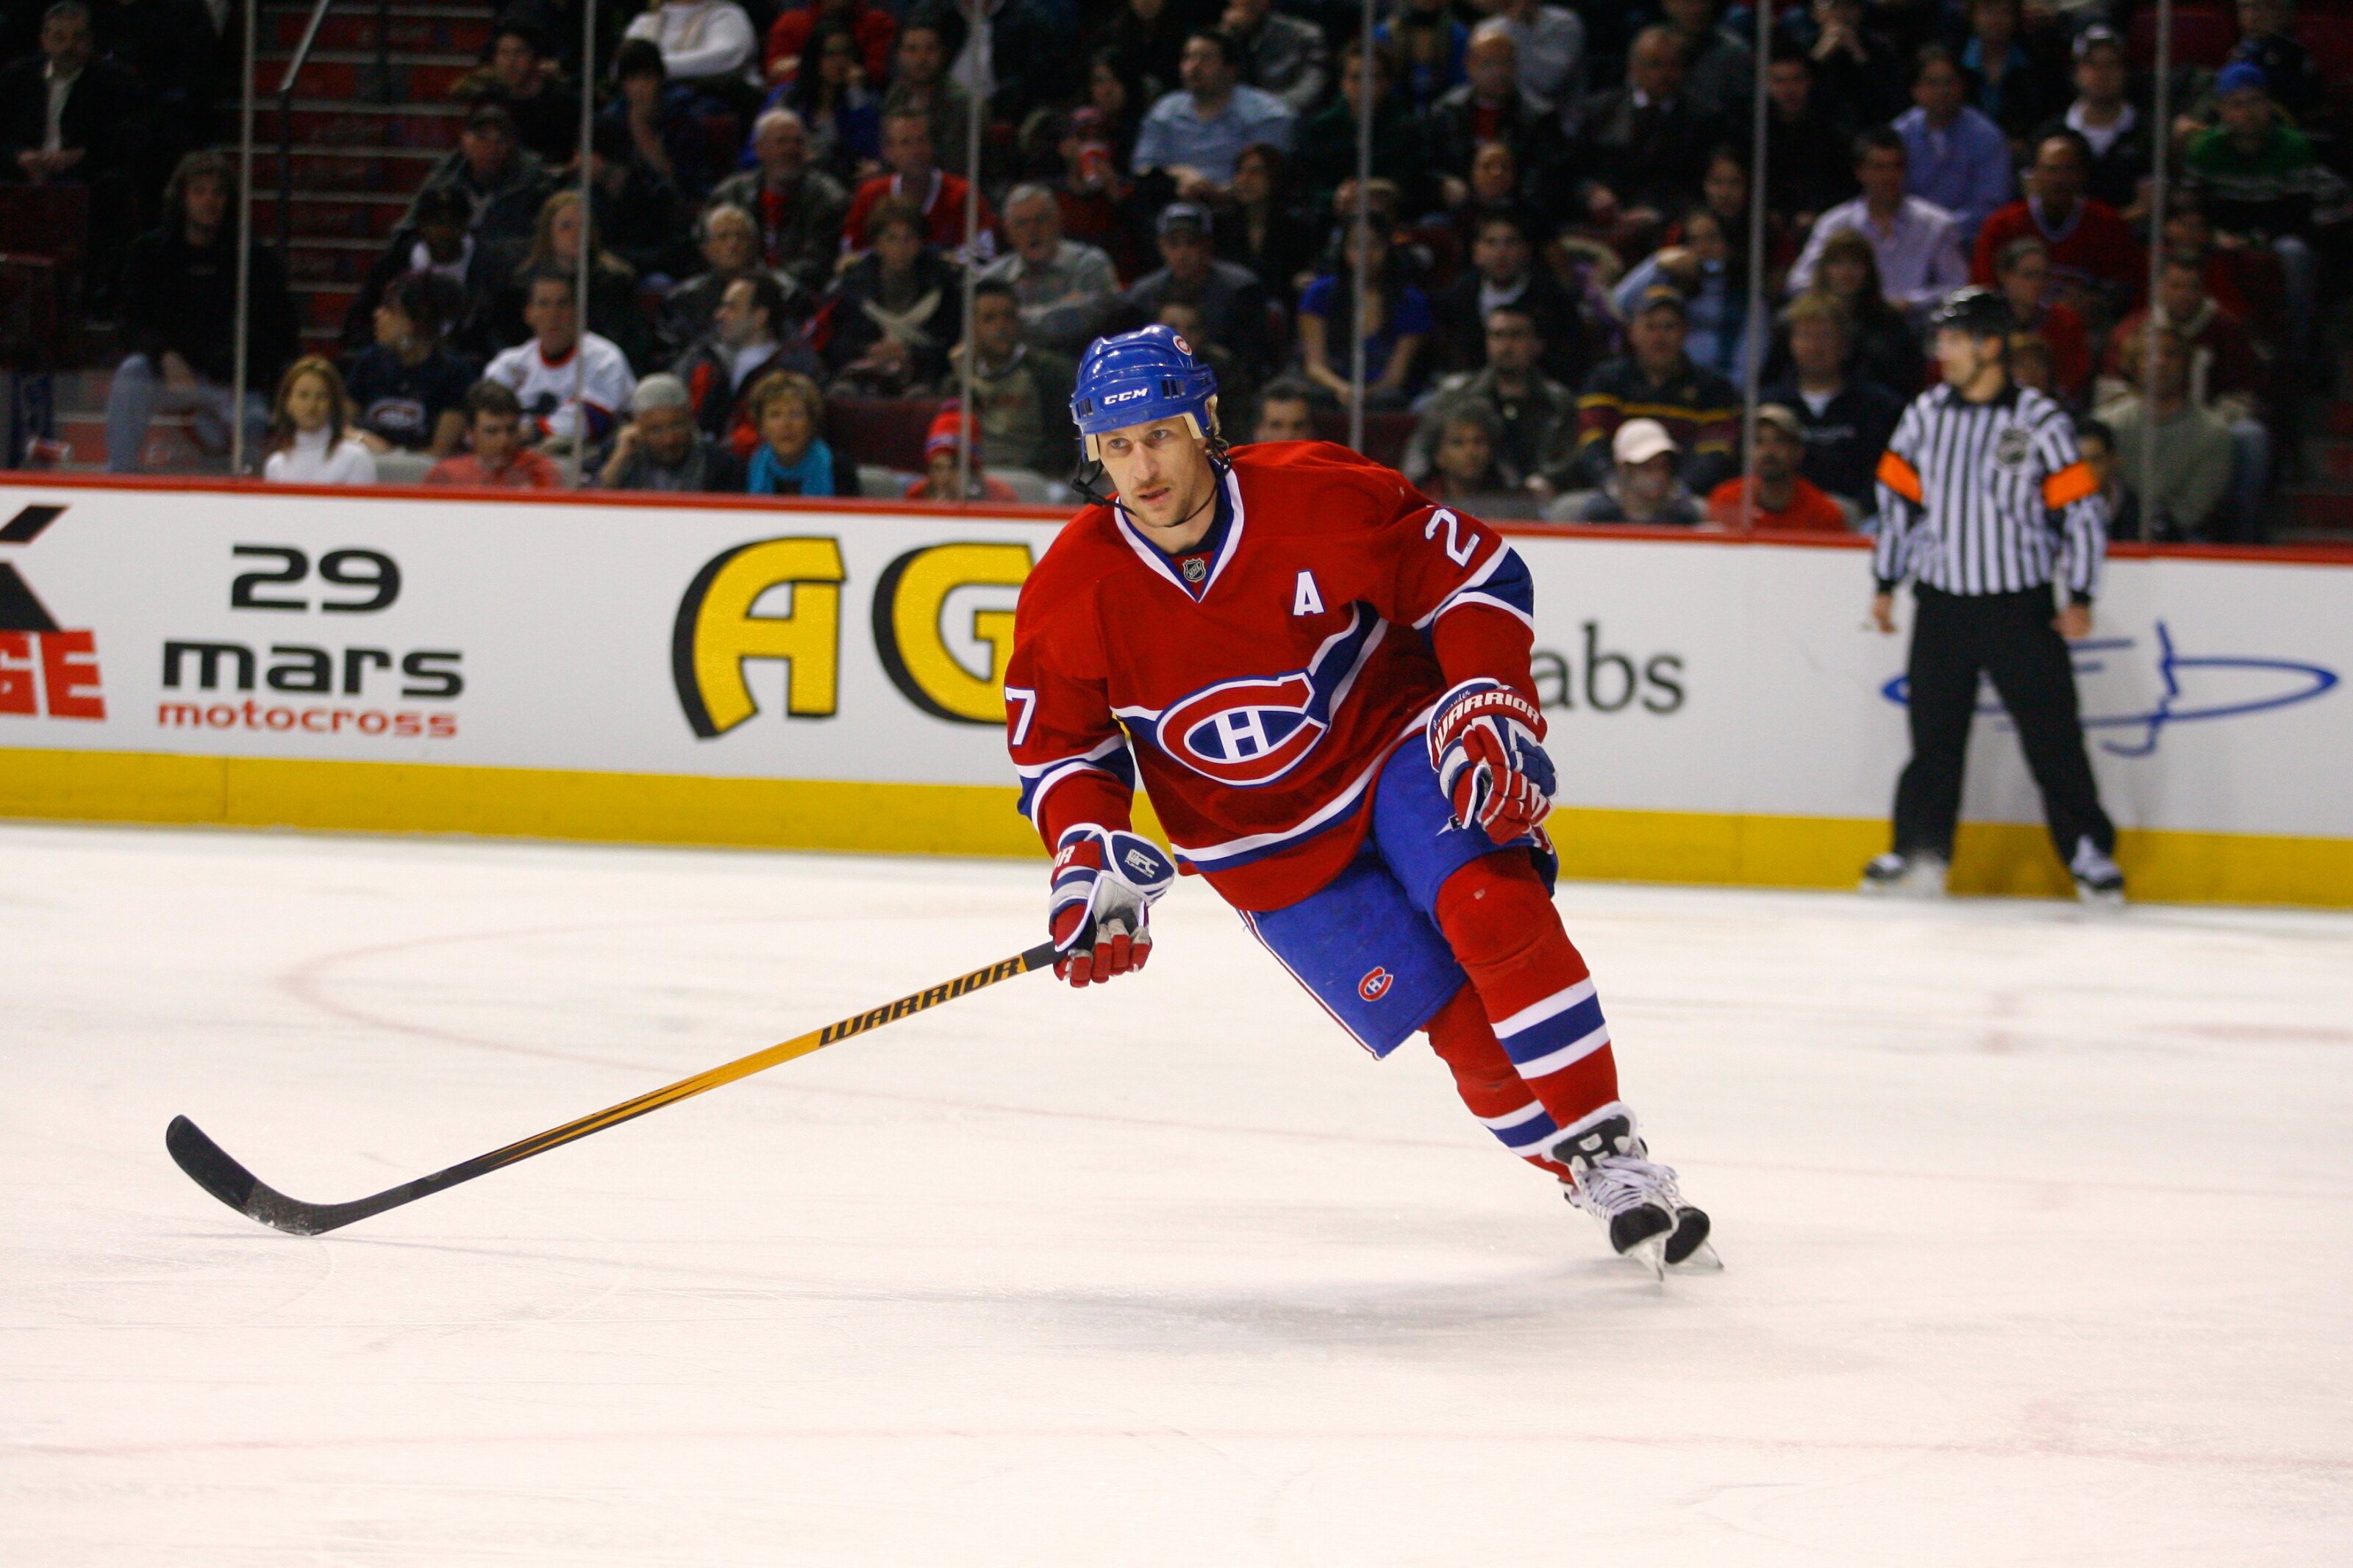 Alexei Kovalev of the Montreal Canadiens looks on during a